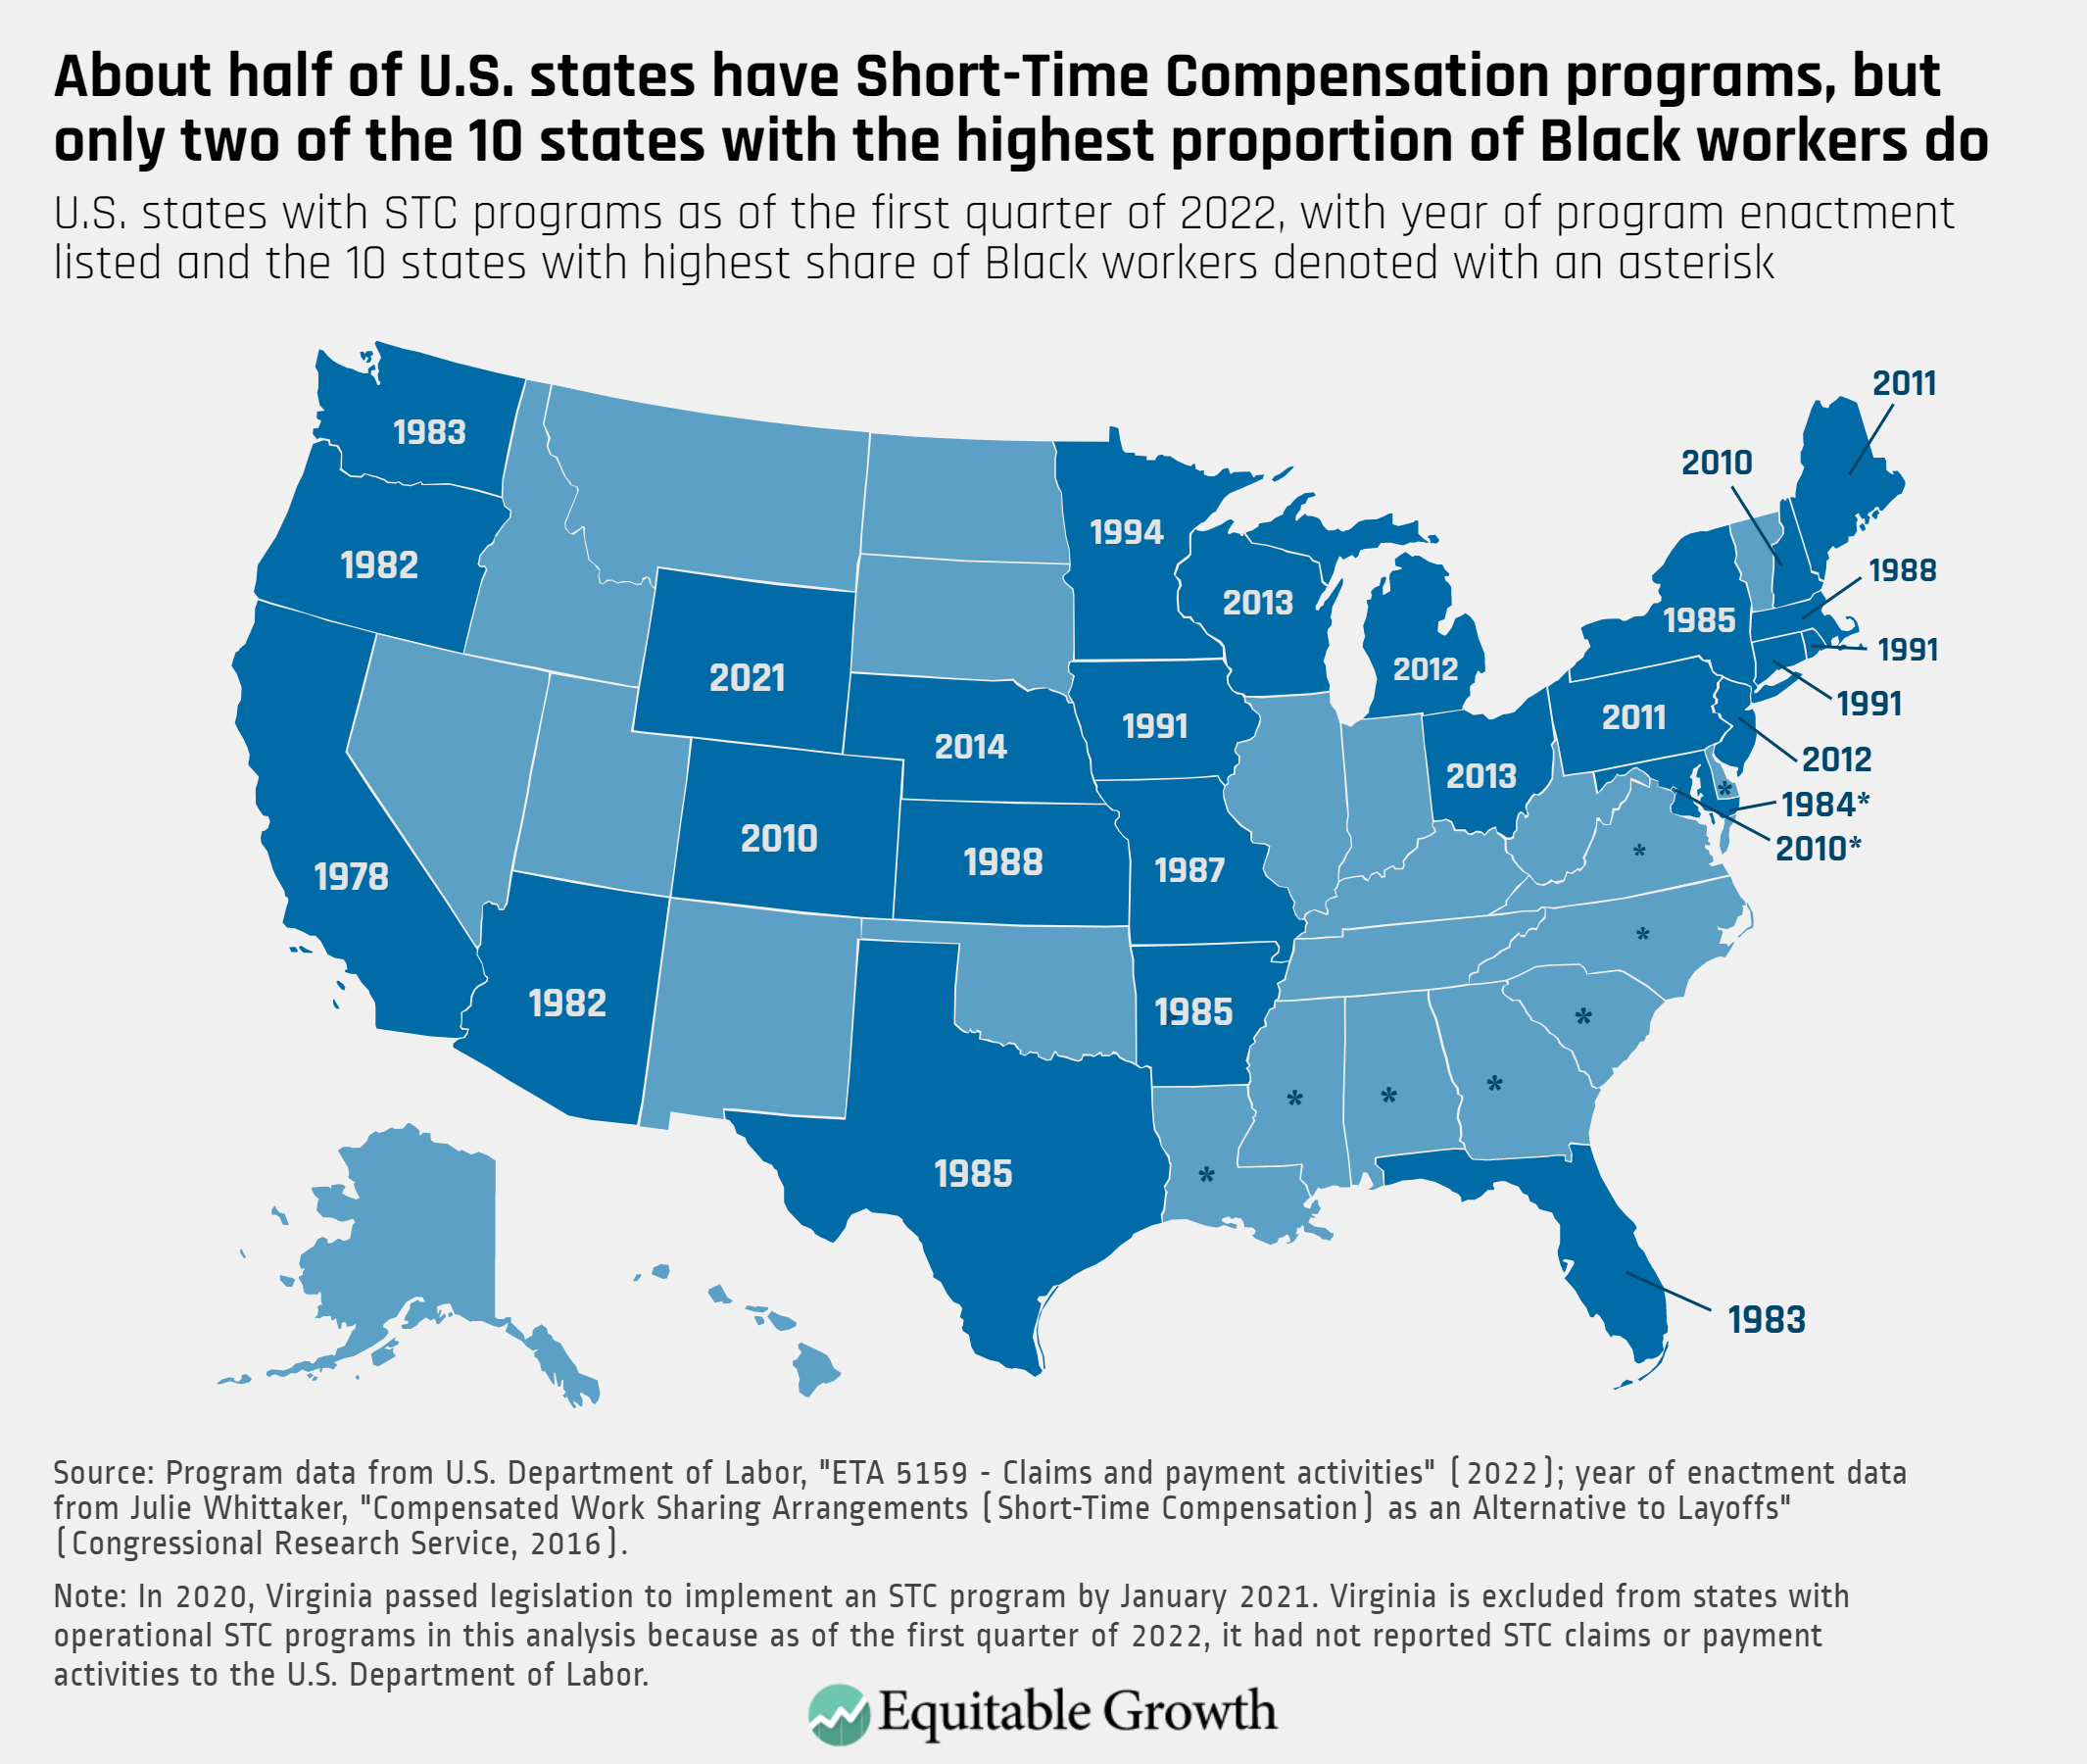 U.S. states with STC programs as of the first quarter of 2022, with year of program enactment listed and the 10 states with highest share of Black workers denoted with an asterisk